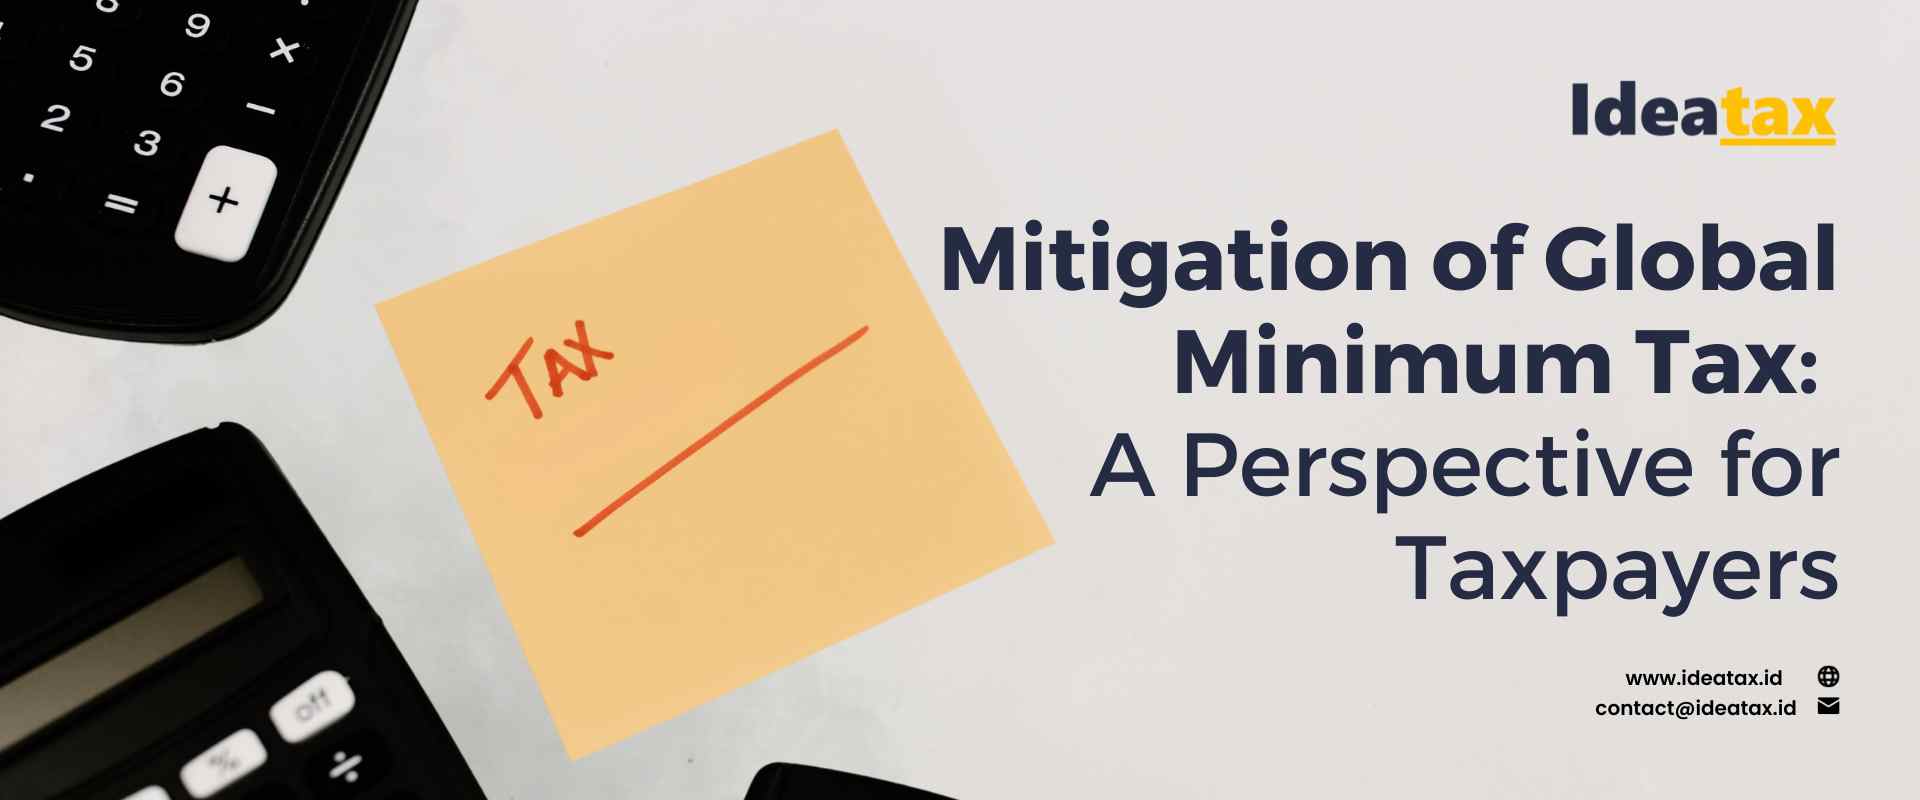 Mitigation of Global Minimum Tax: A Perspective for Taxpayers